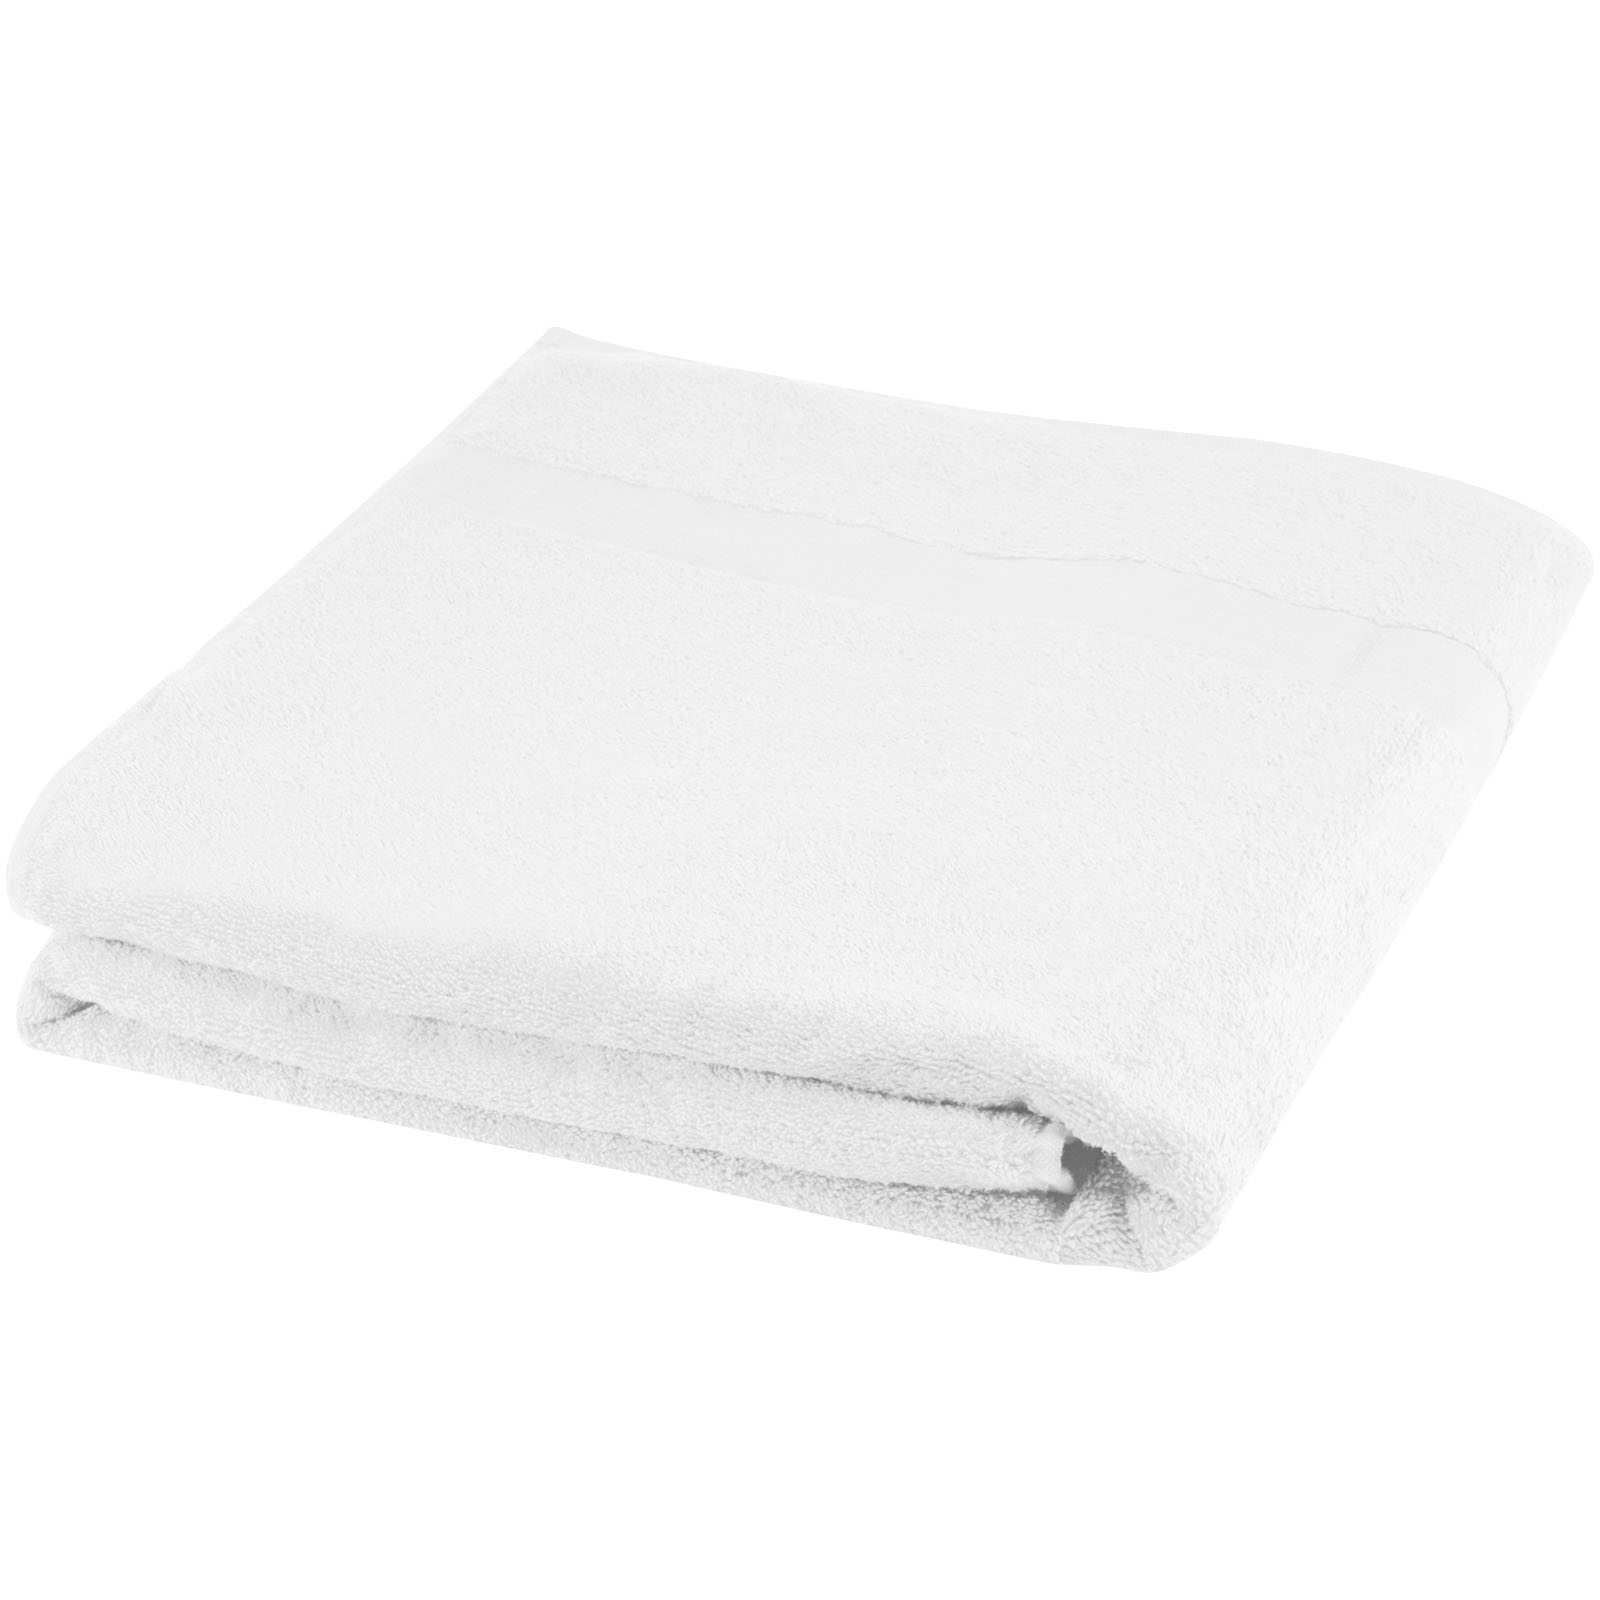 Advertising Towels - Evelyn 450 g/m² cotton towel 100x180 cm